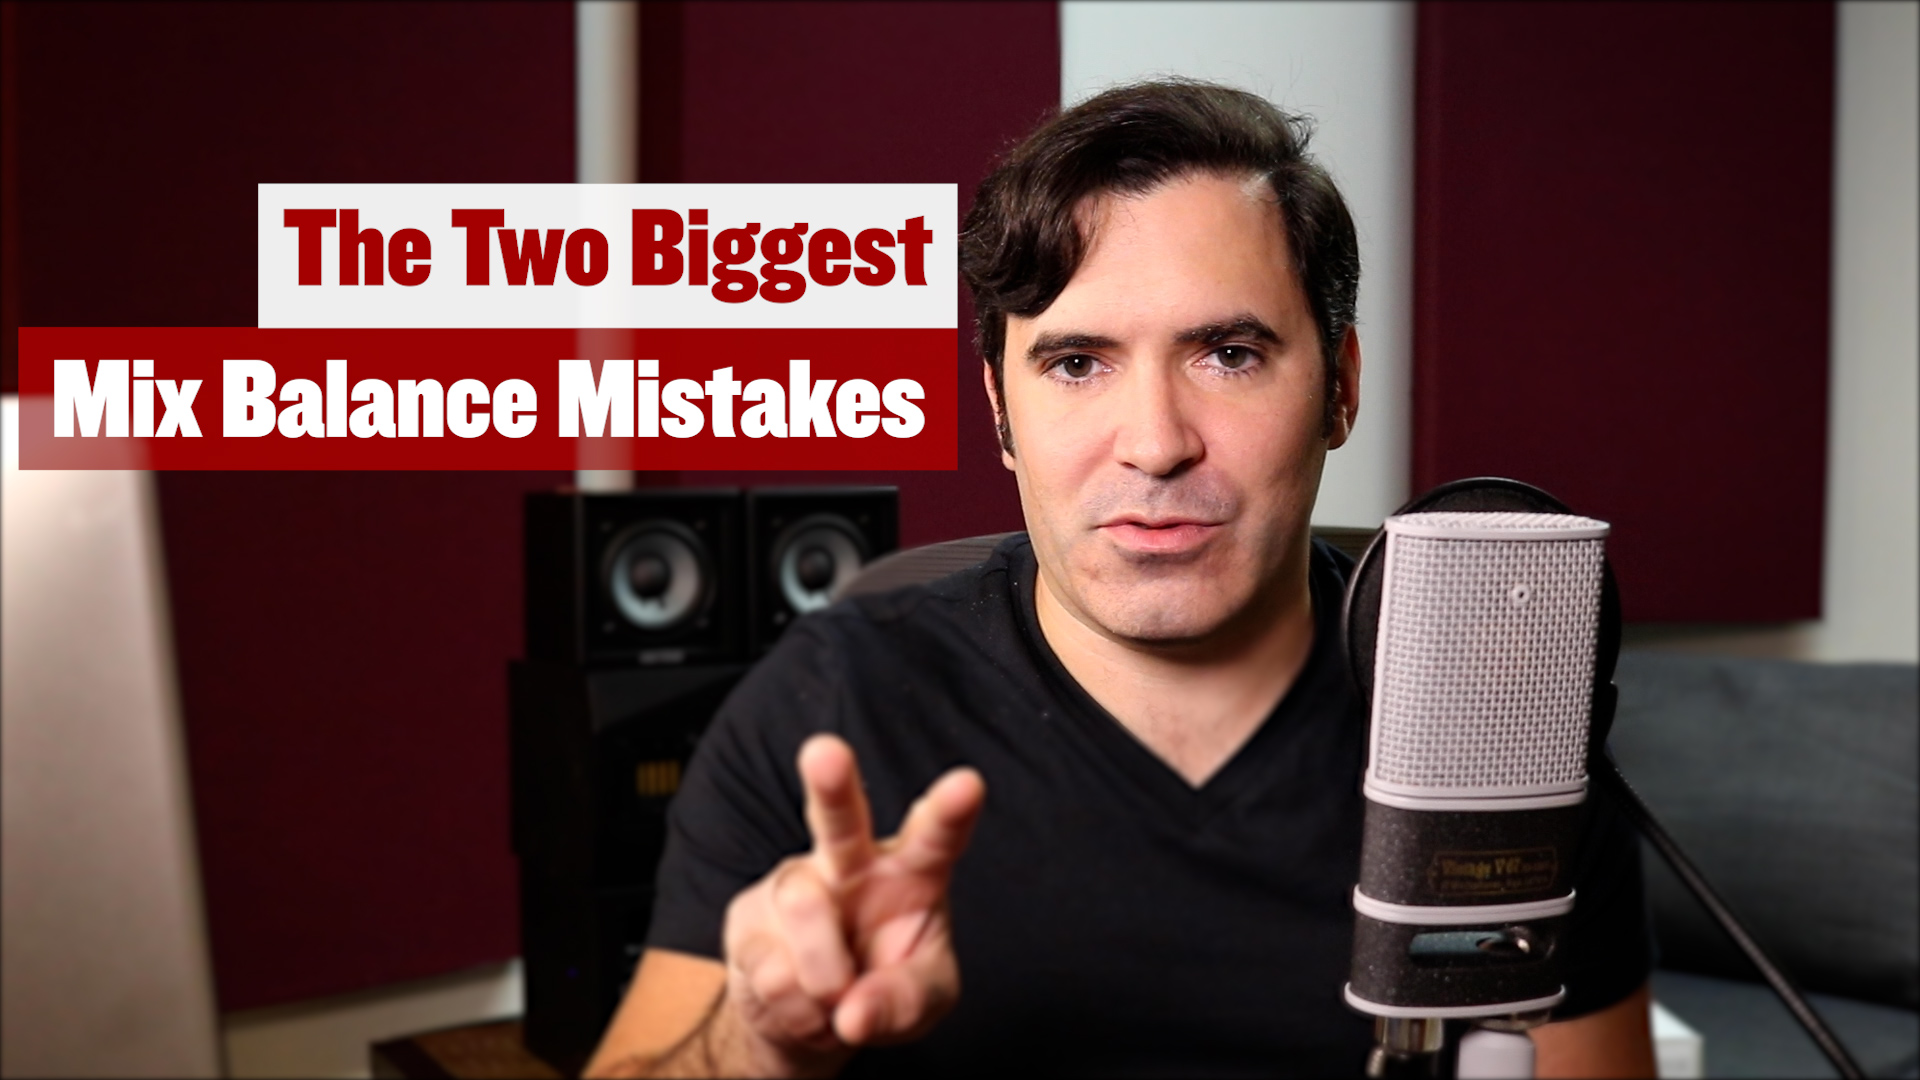 The 2 Biggest Mix Balance Mistakes